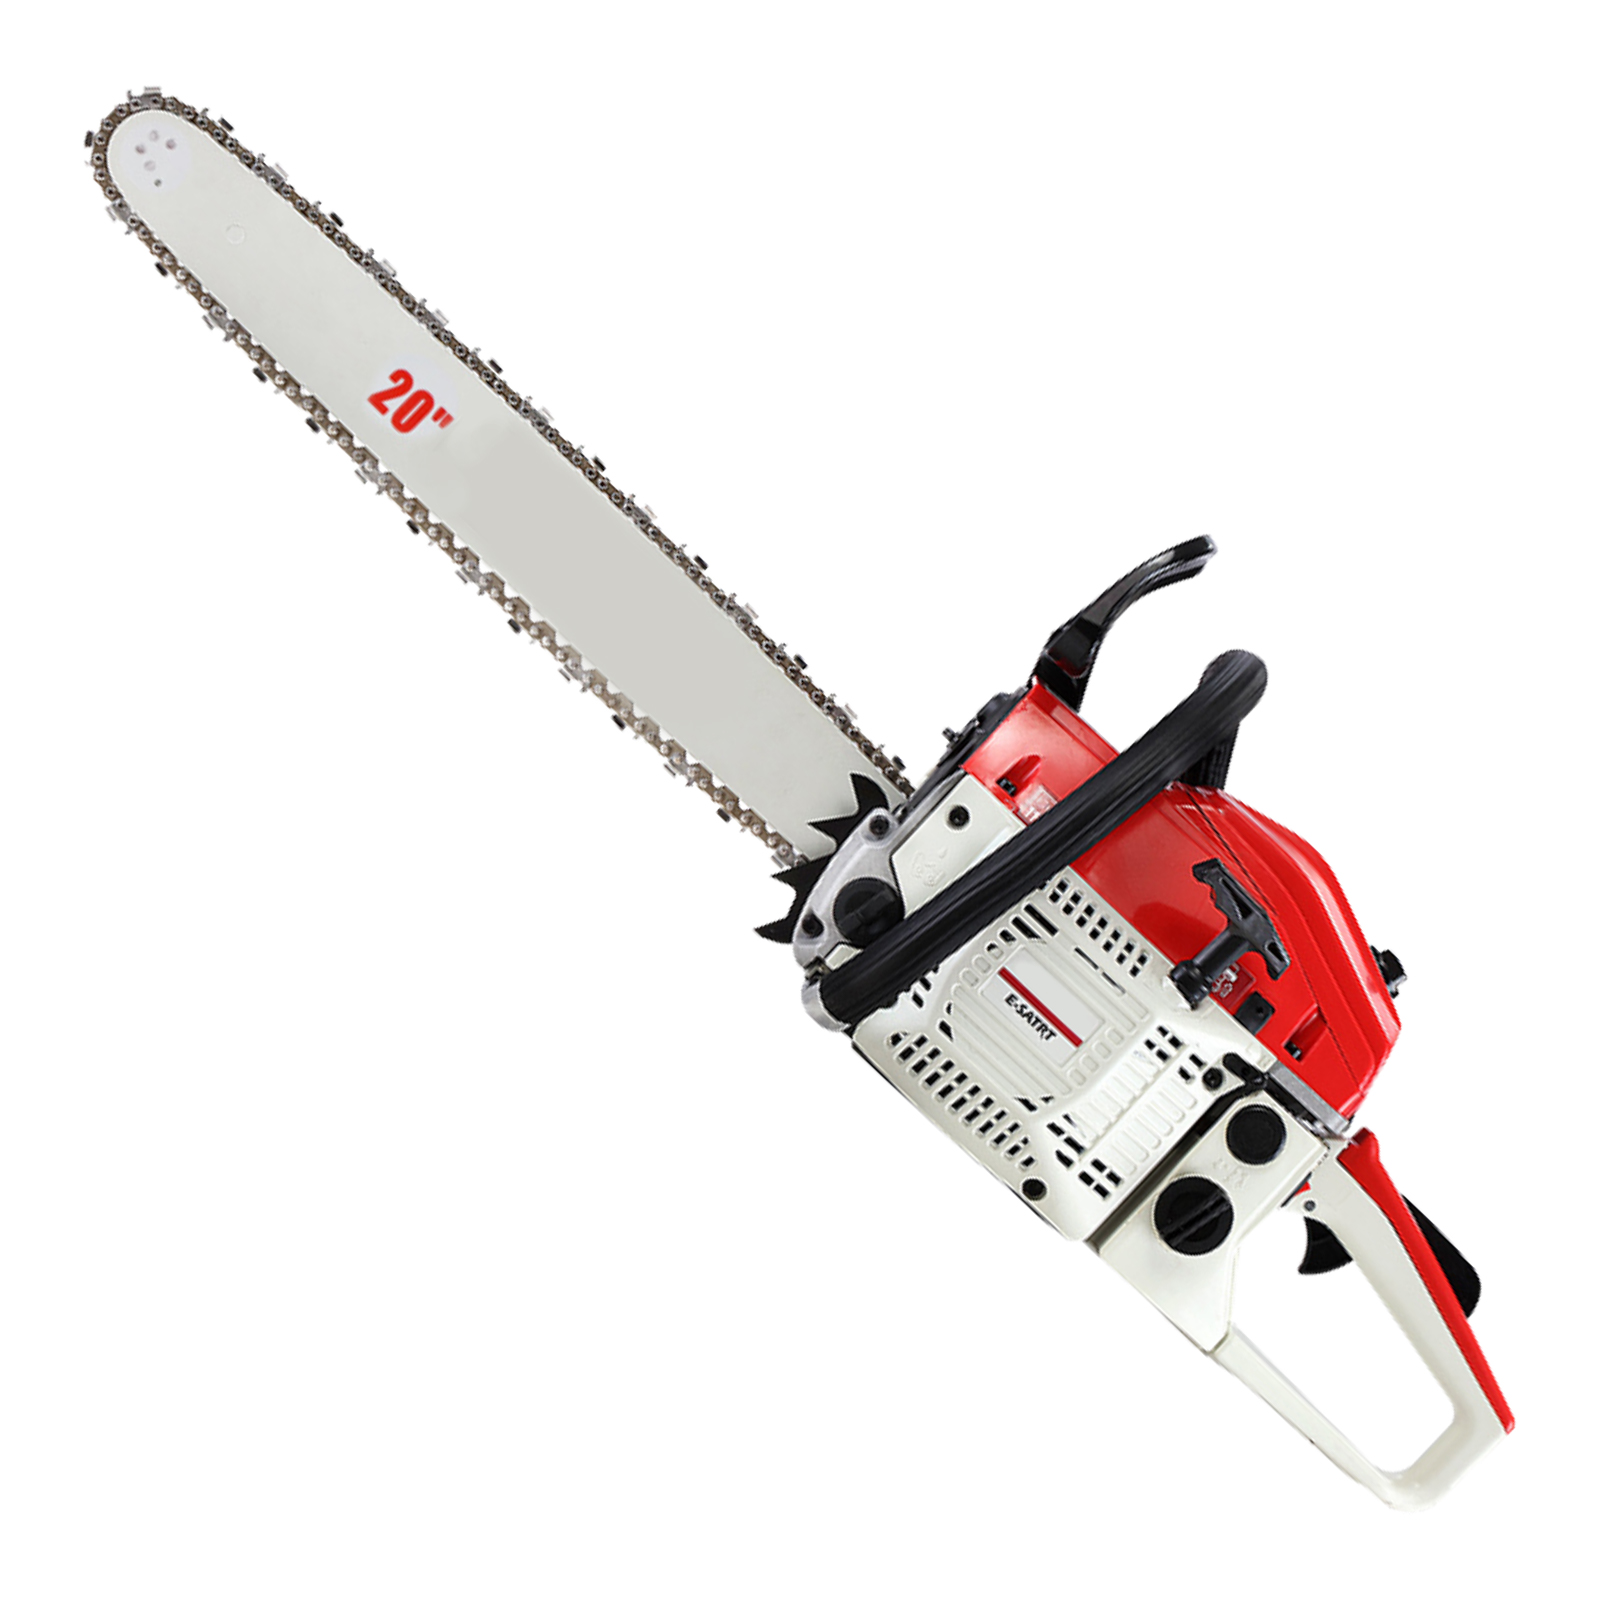 Powerful red and white chainsaw with a 20-inch blade, designed for efficient cutting and sawing tasks, suitable for both professional and home use.